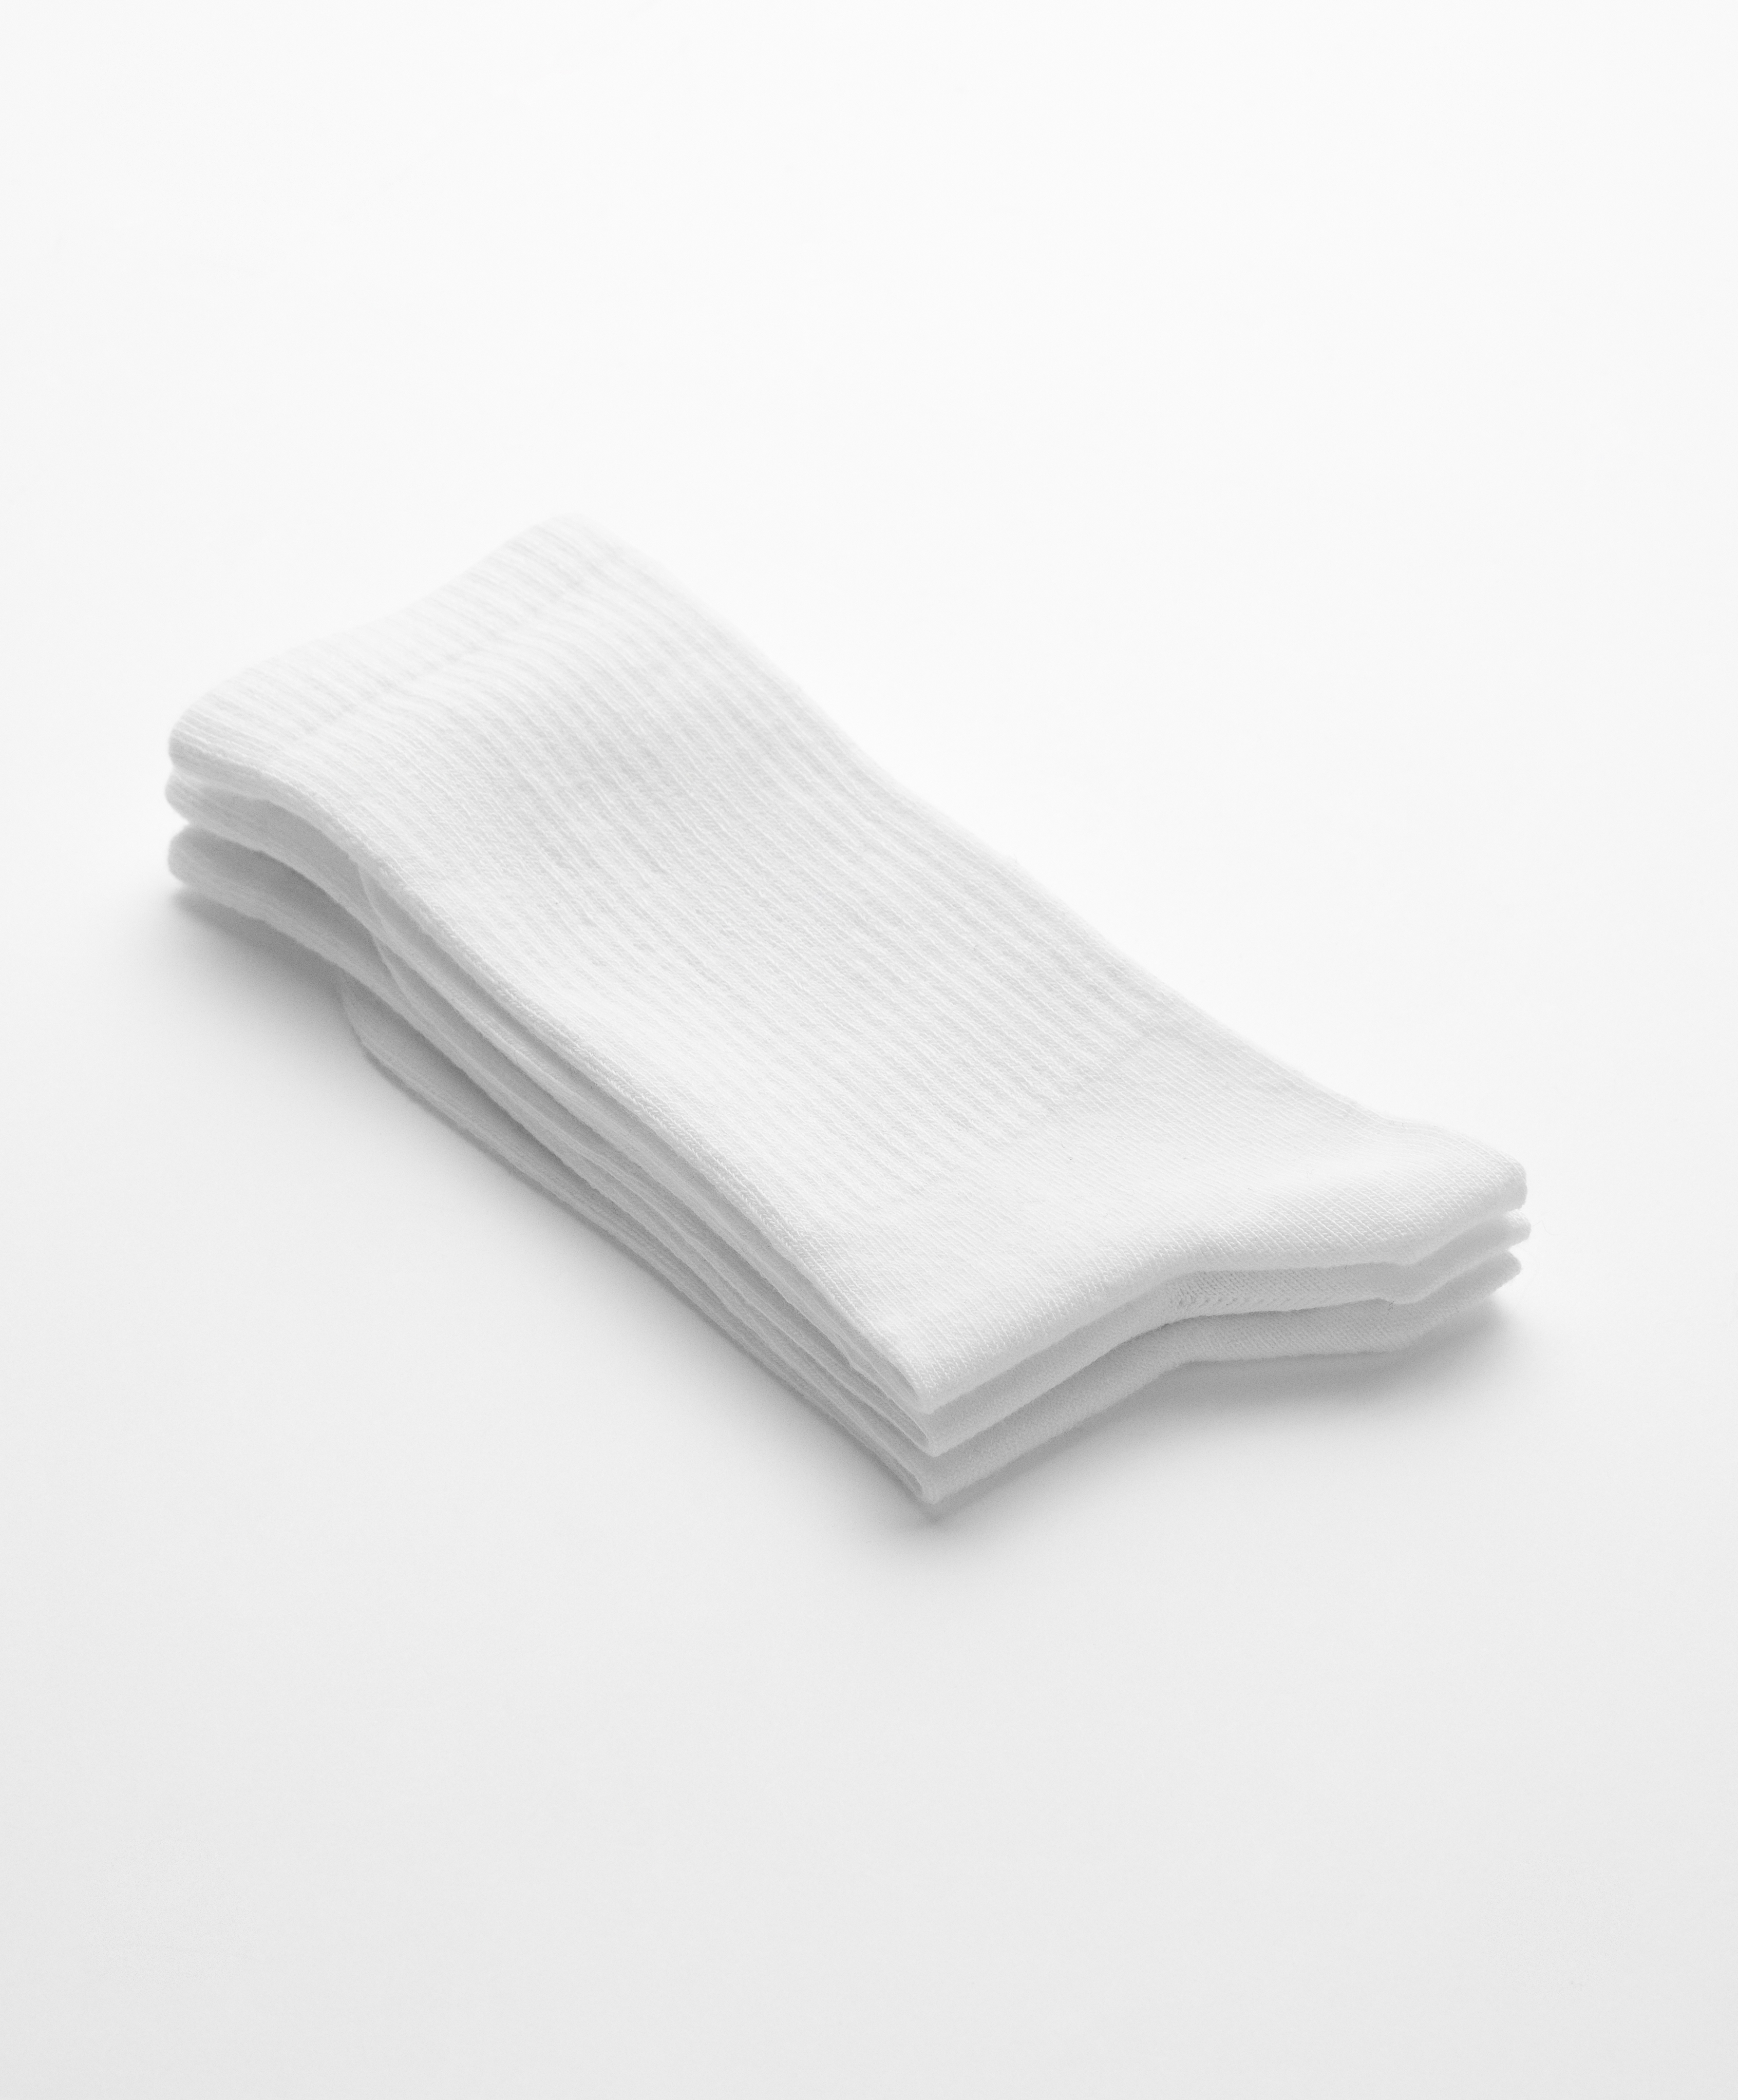 3 pairs of sports cotton classic socks